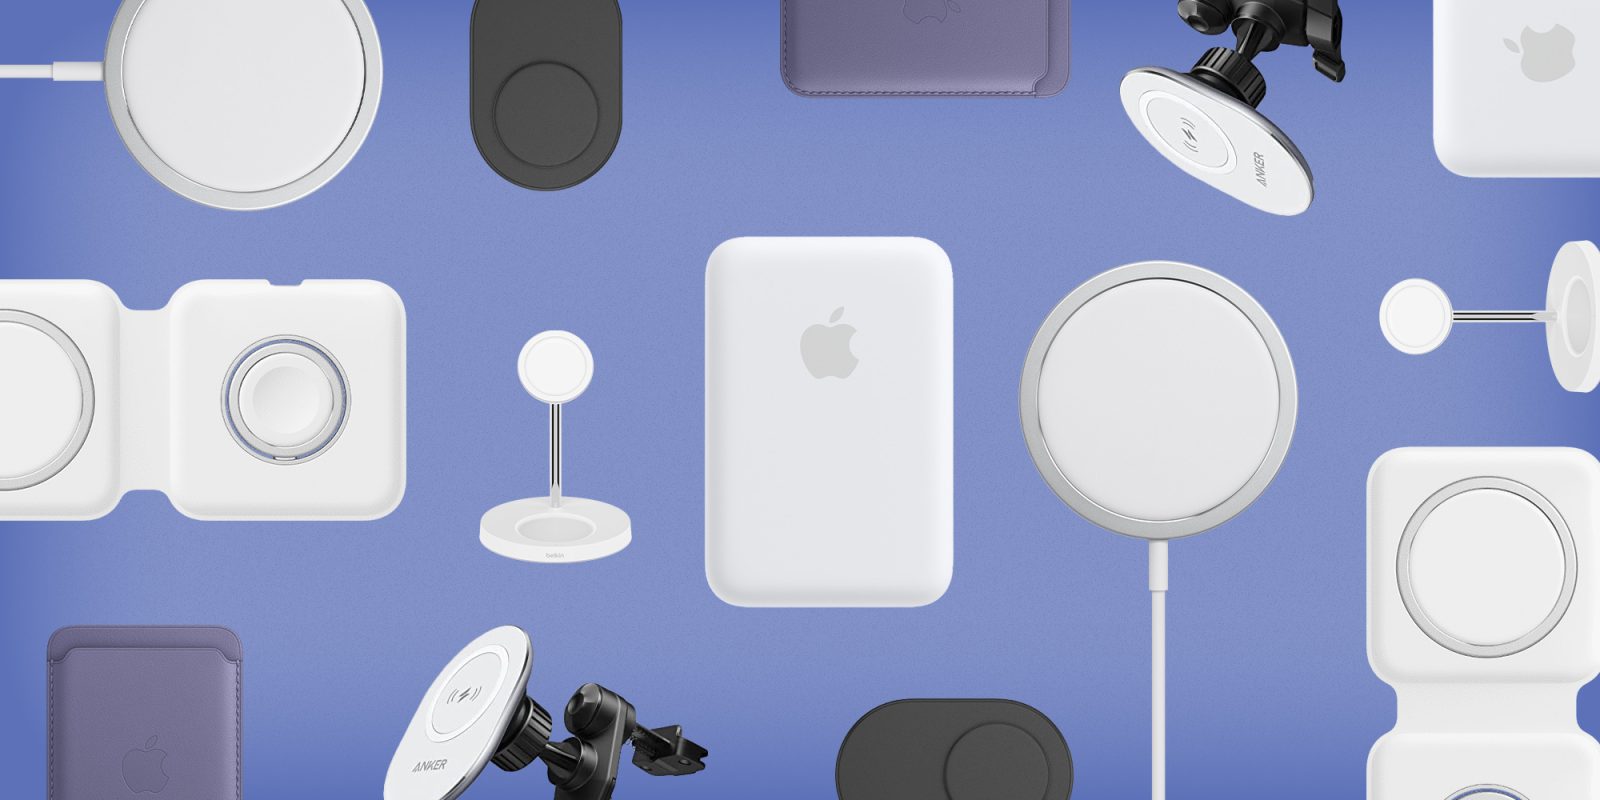 The best iPhone accessories: MagSafe chargers and more - 9to5Mac